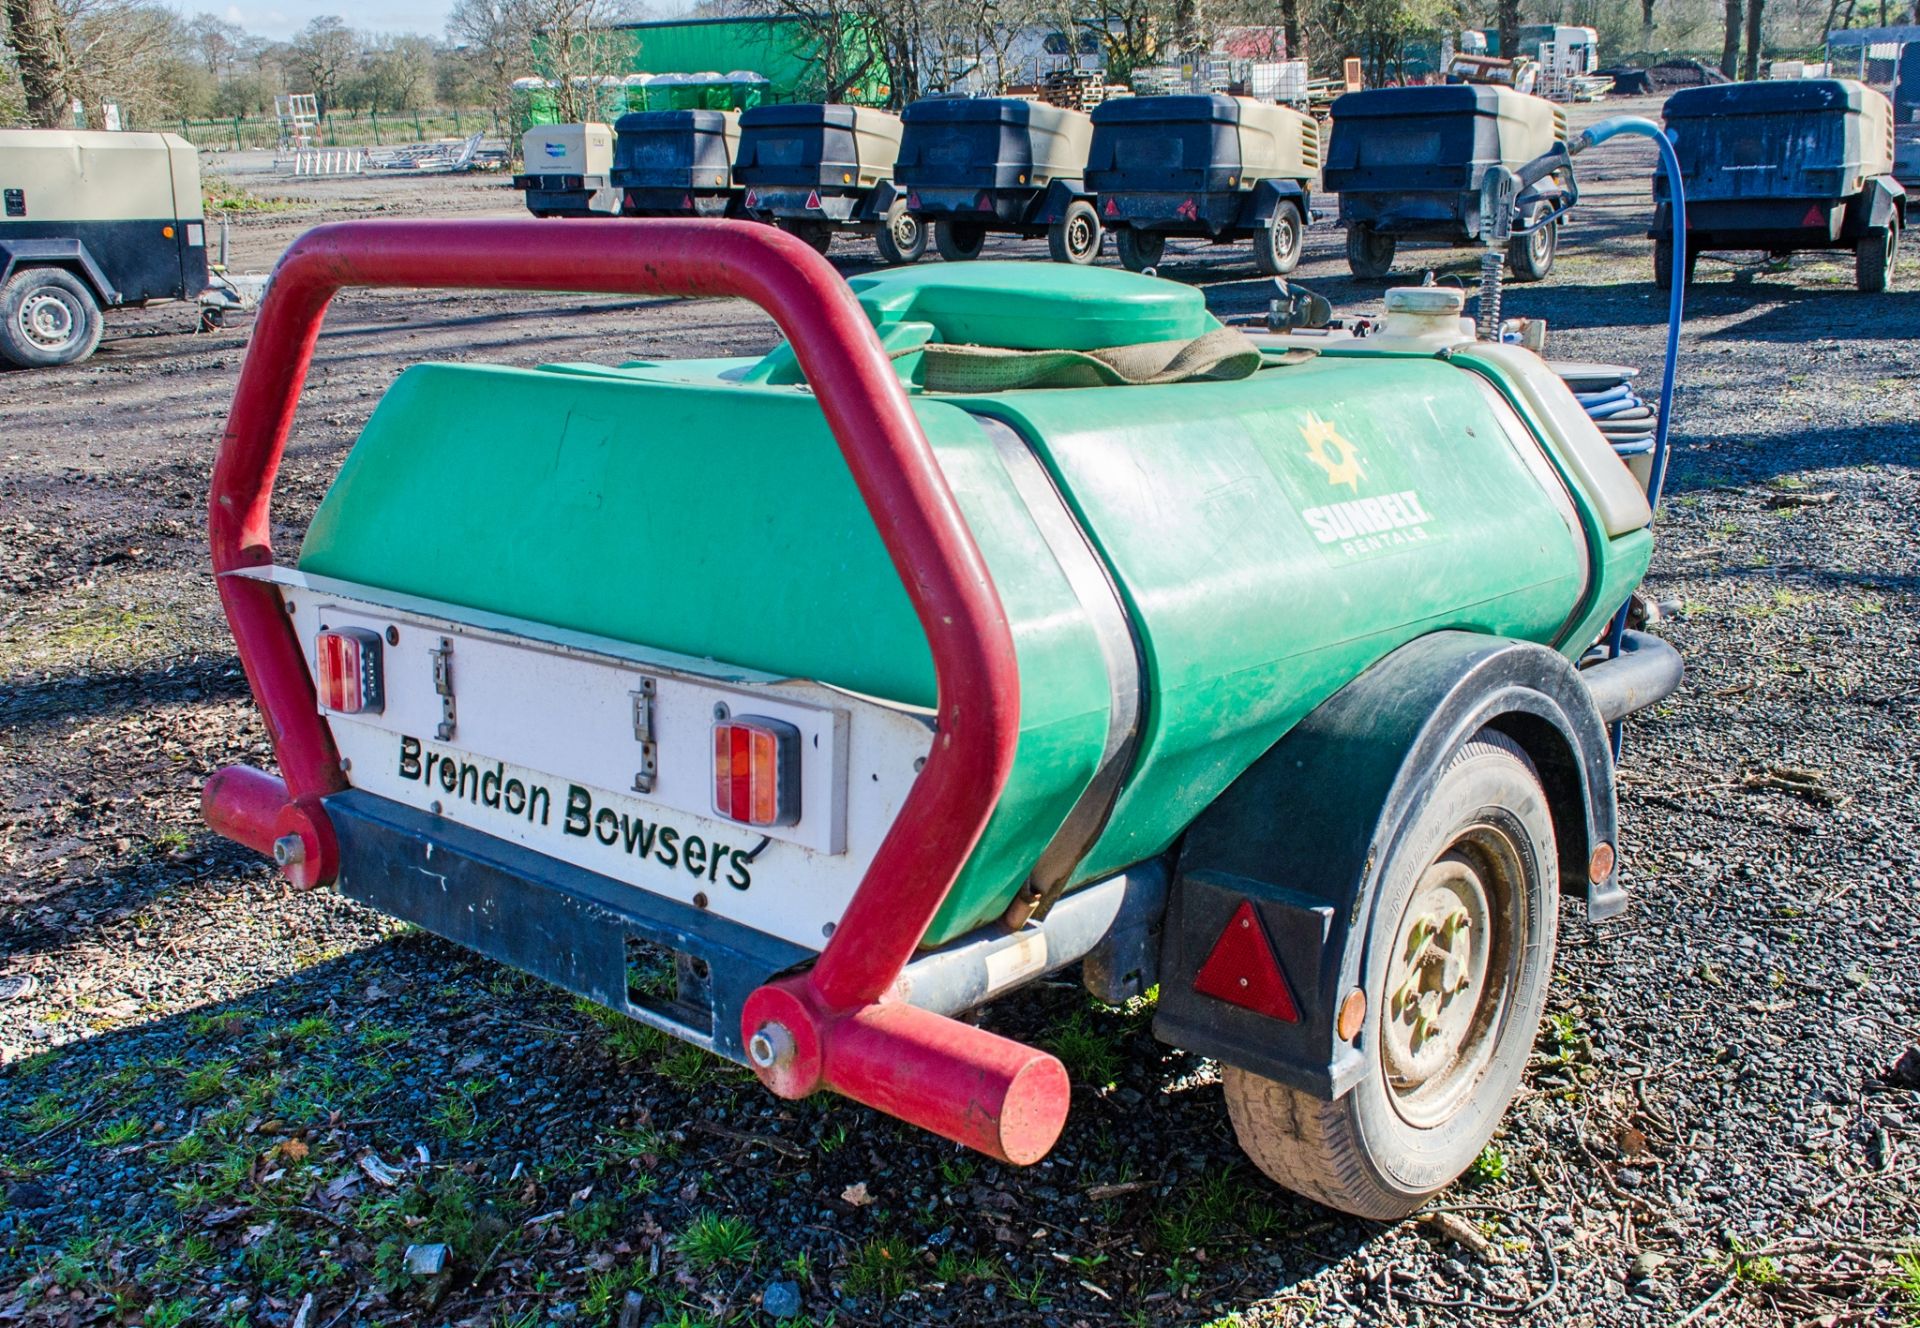 Brendon diesel driven fast tow mobile pressure washer bowser c/w lance A645324 - Image 2 of 4